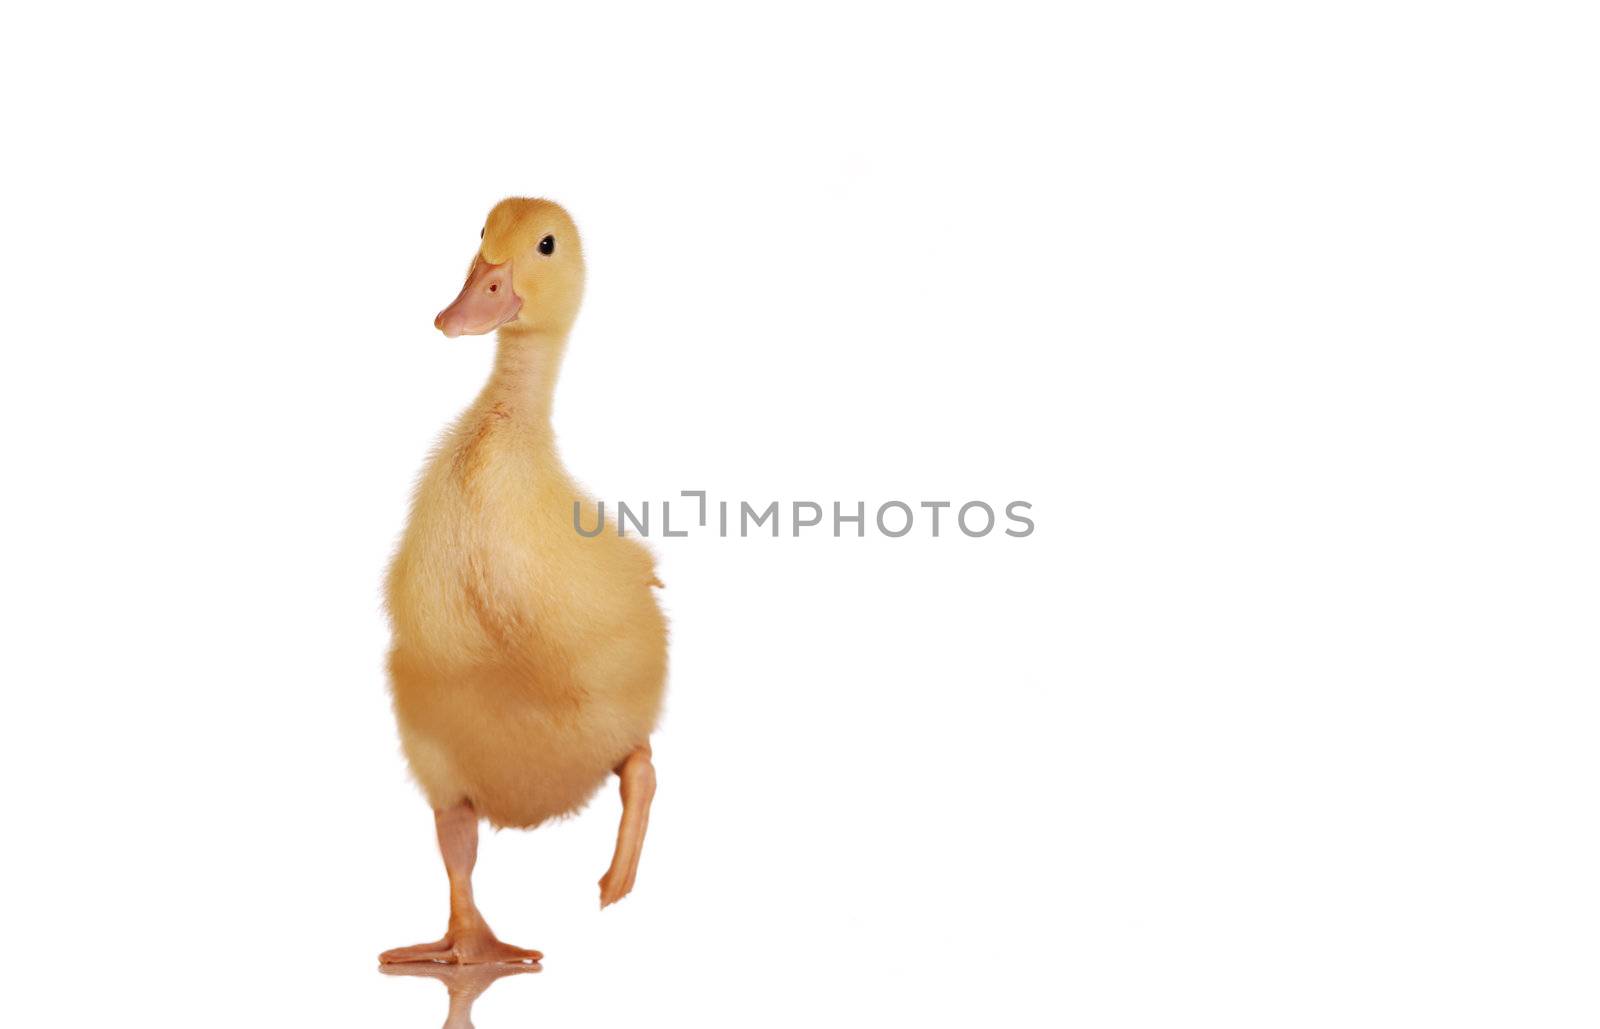 One young yellow duckling standing, isolated on white